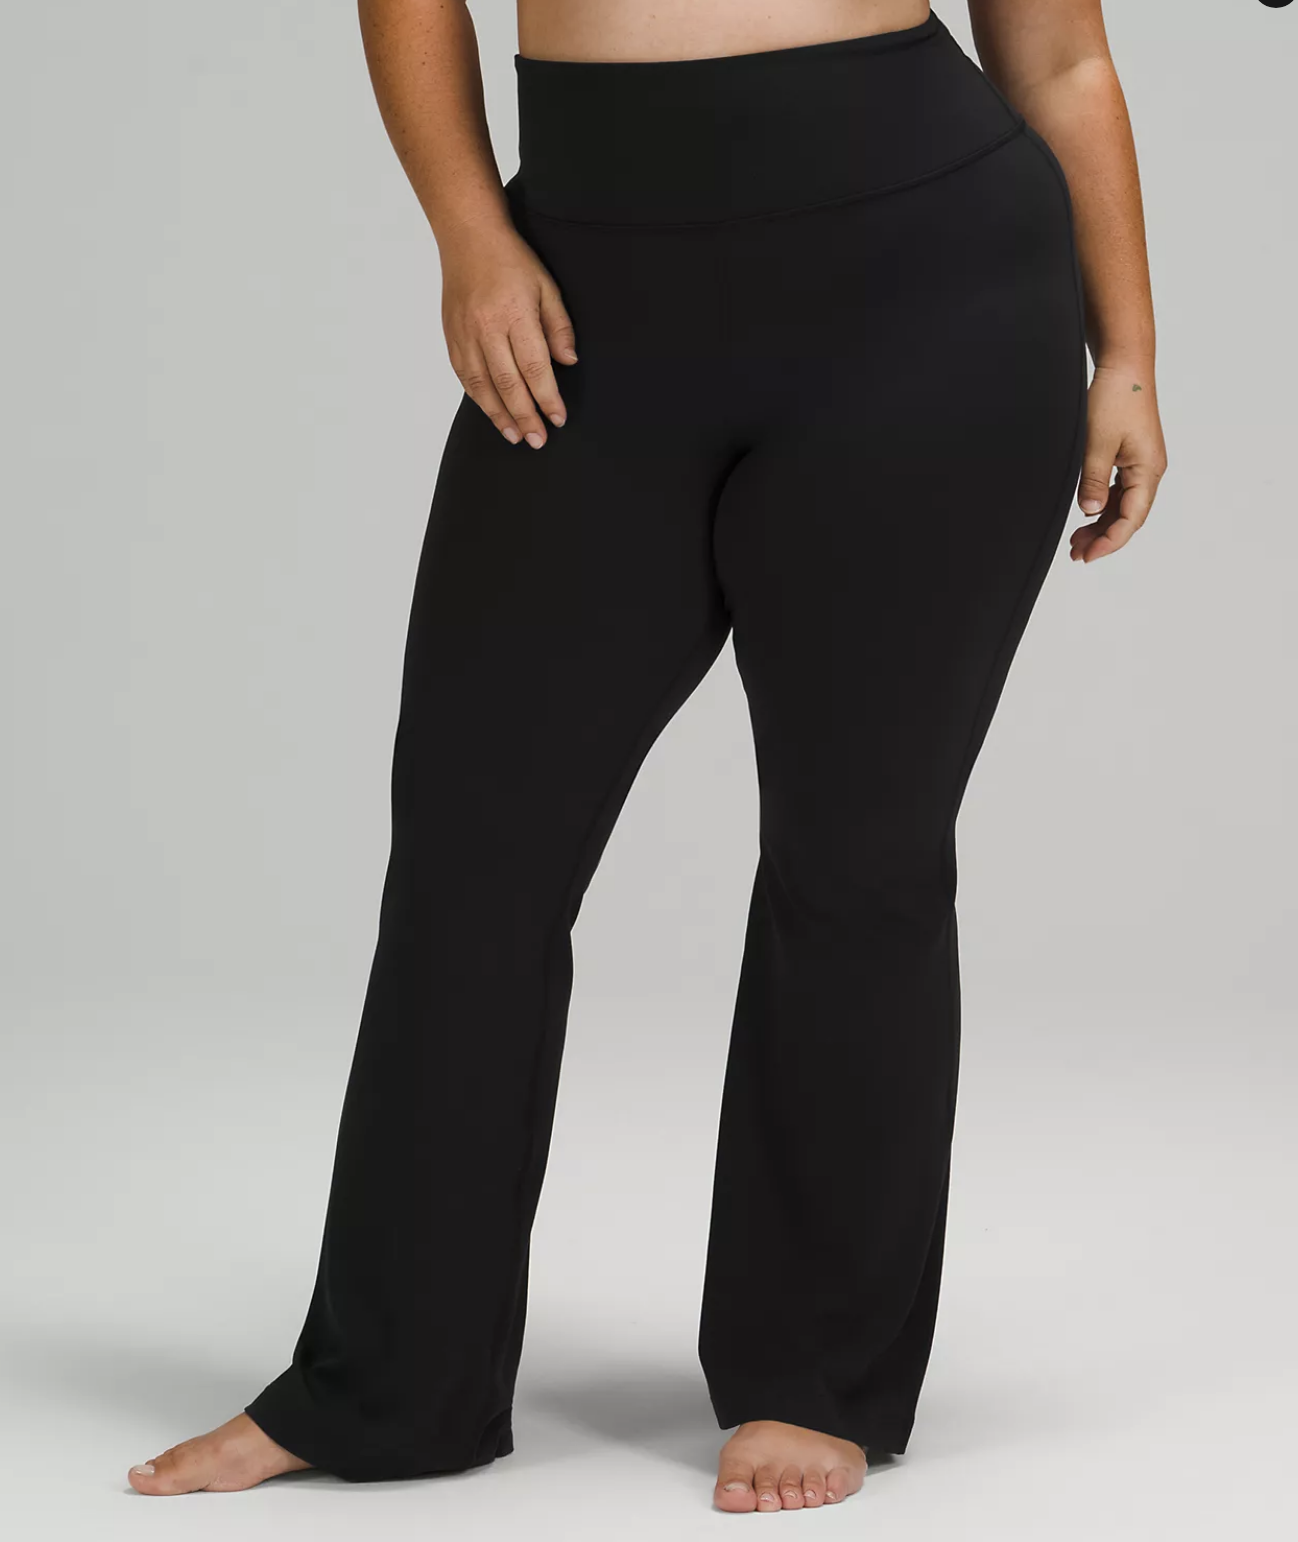 The 20 Best Bootcut Yoga Pants You Can Buy | Who What Wear UK